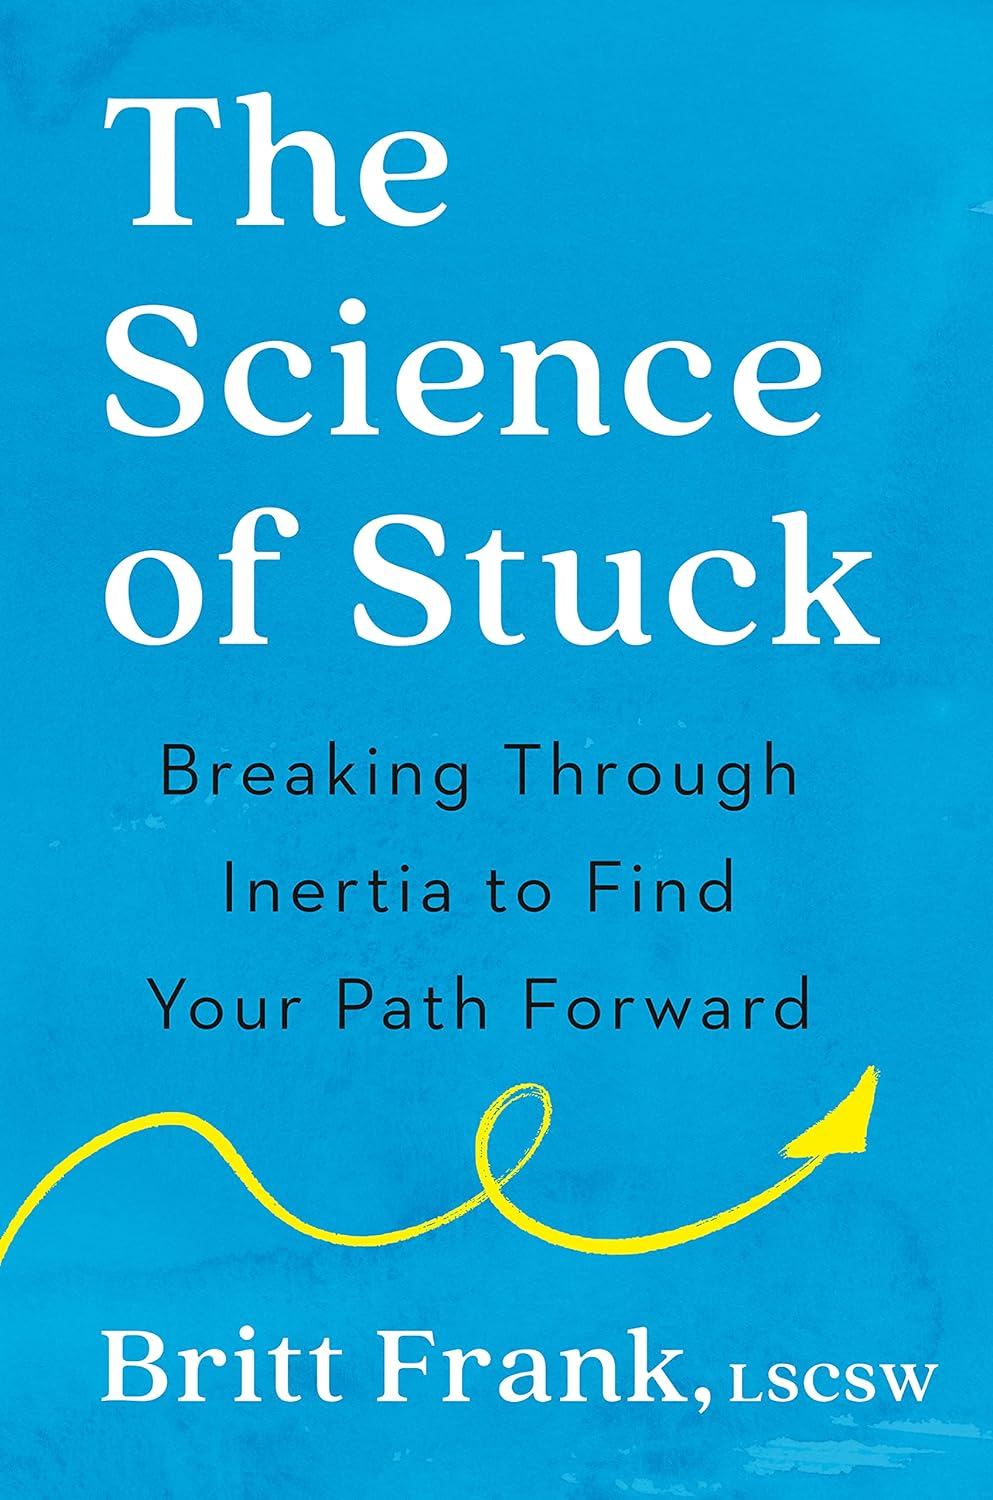 The Science of Stuck 책 표지